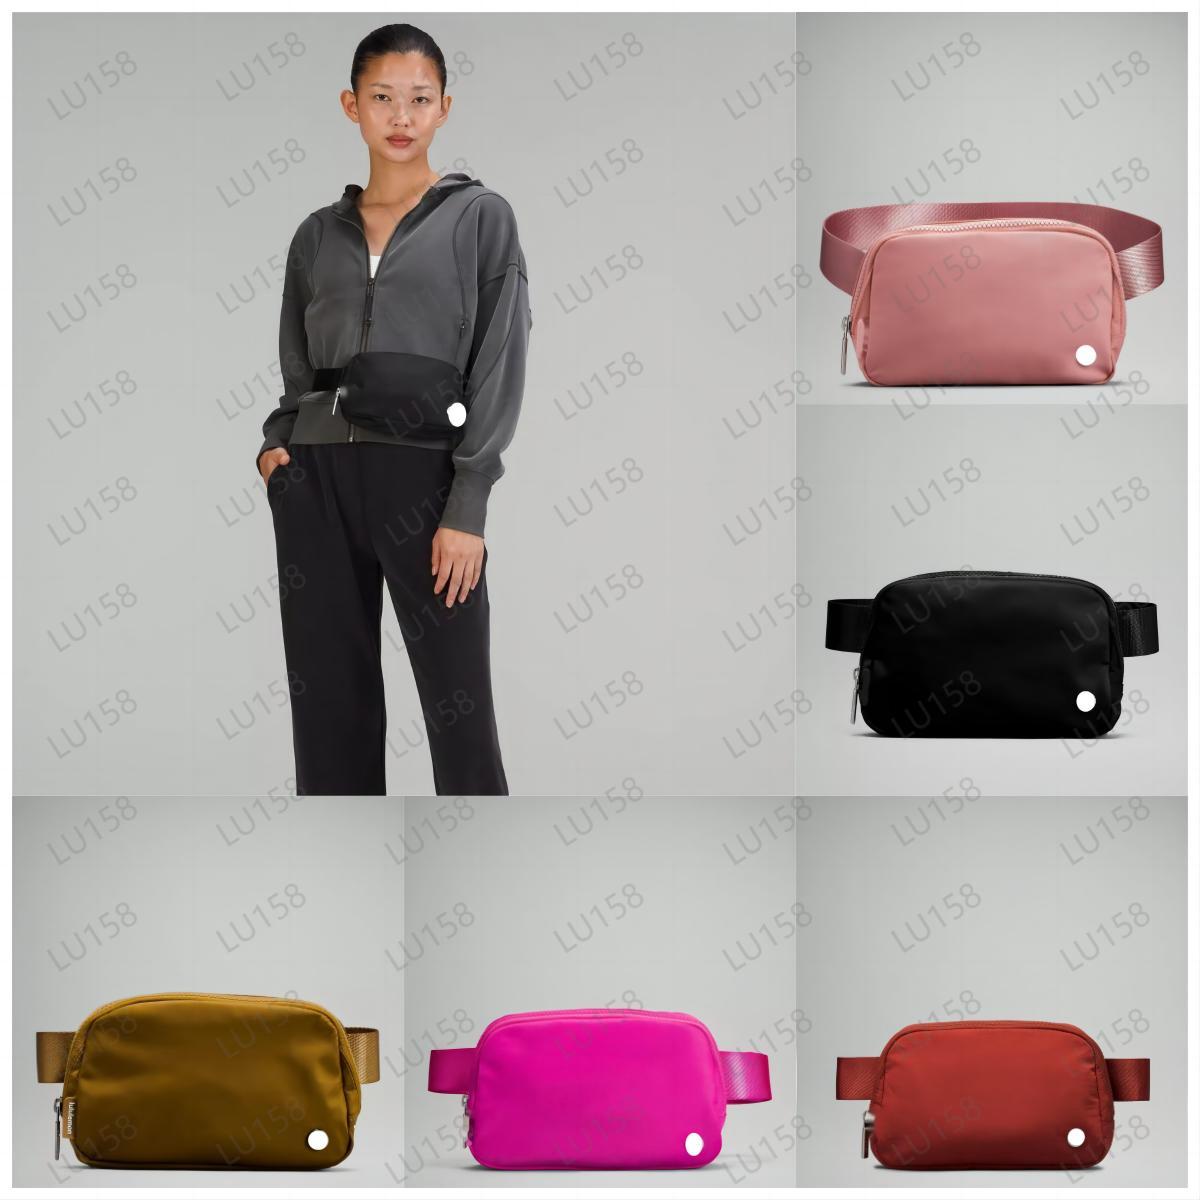 Lu158 New Fashion Outdoor Sports Fitness Waist Bag Running Phone Storage Bag Multi functional Outdoor